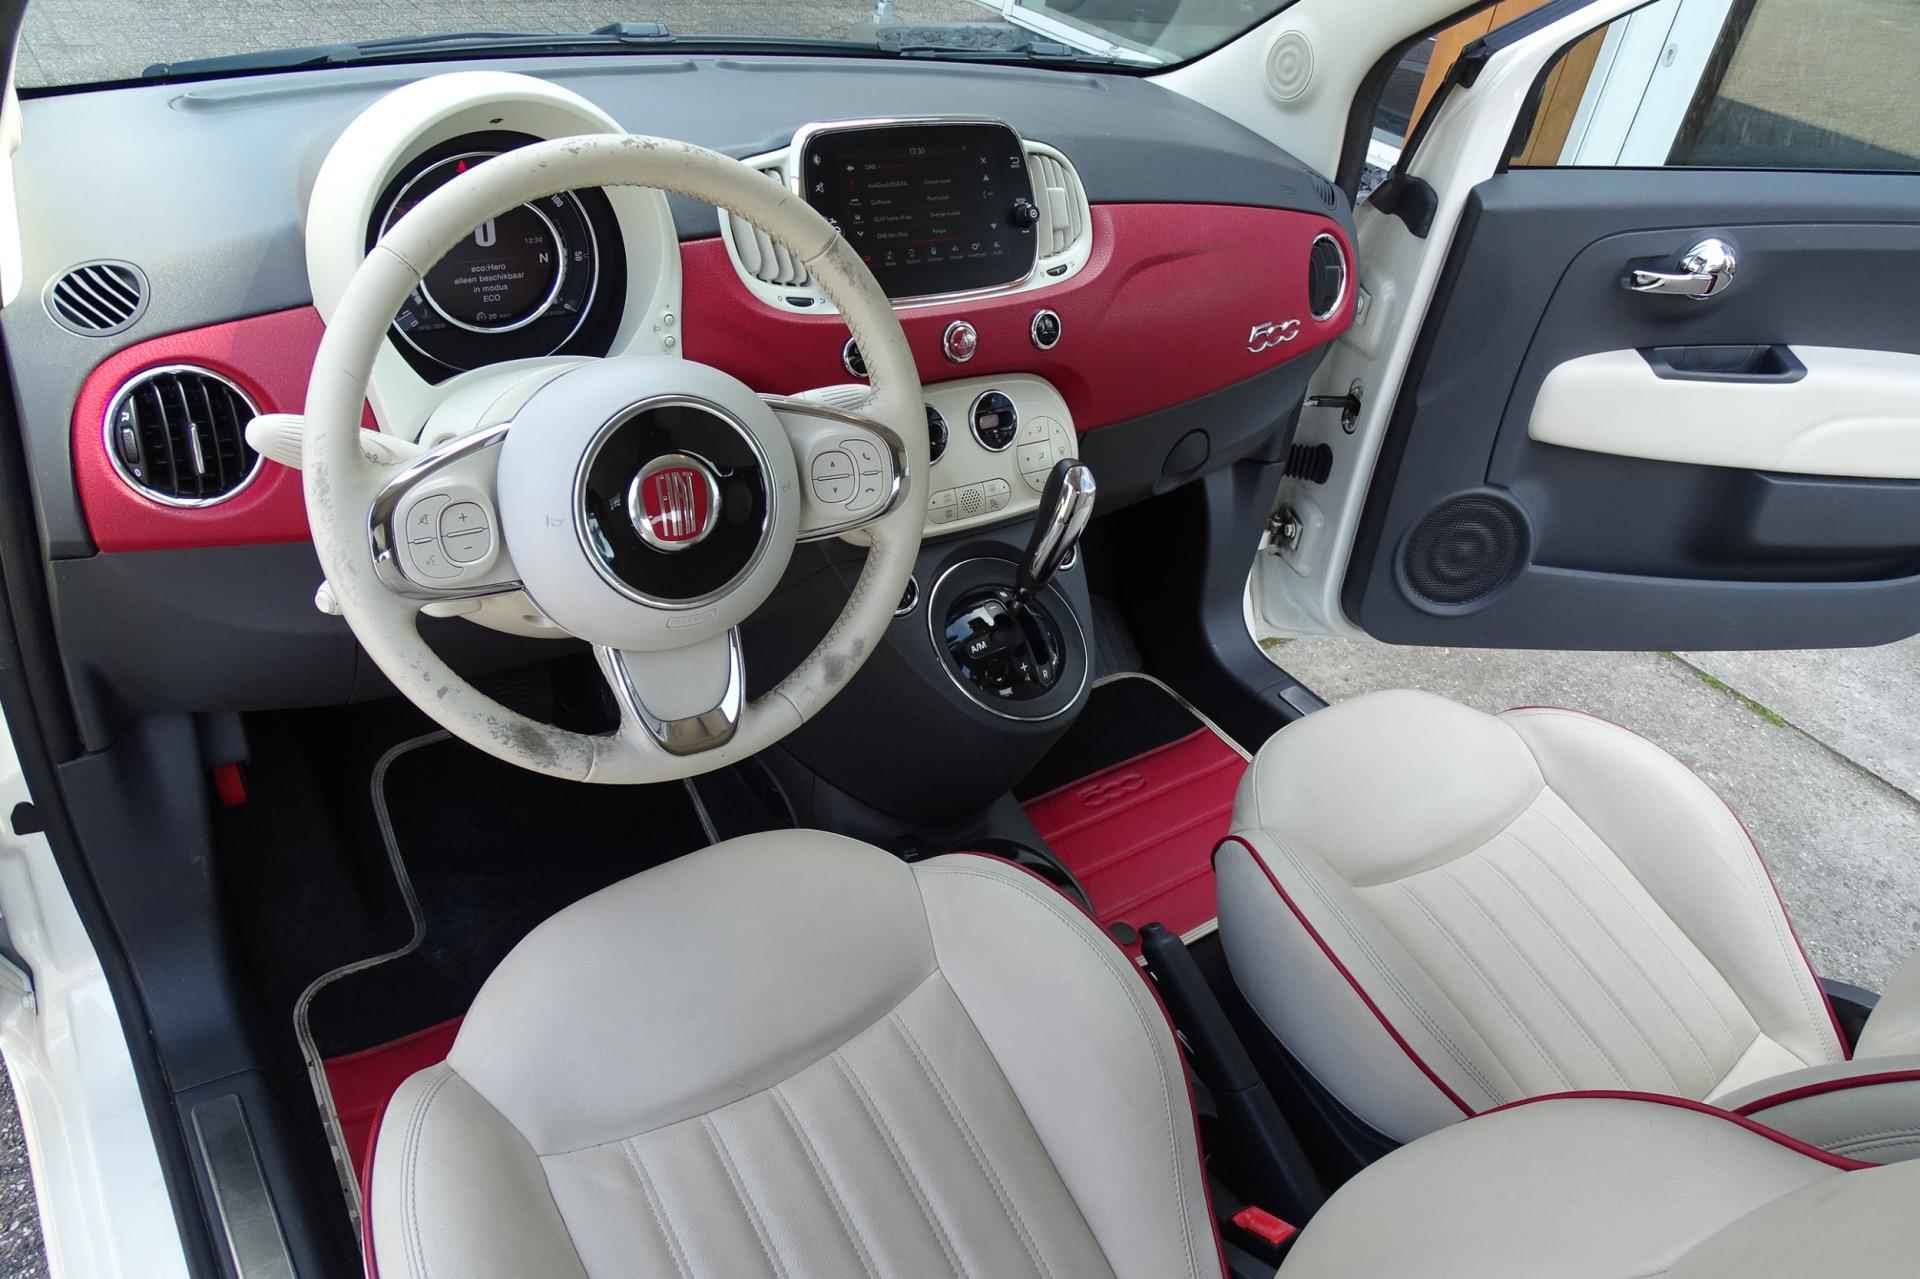 Fiat 500 C 0.9 TwinAir Turbo Forever Young - 8/41